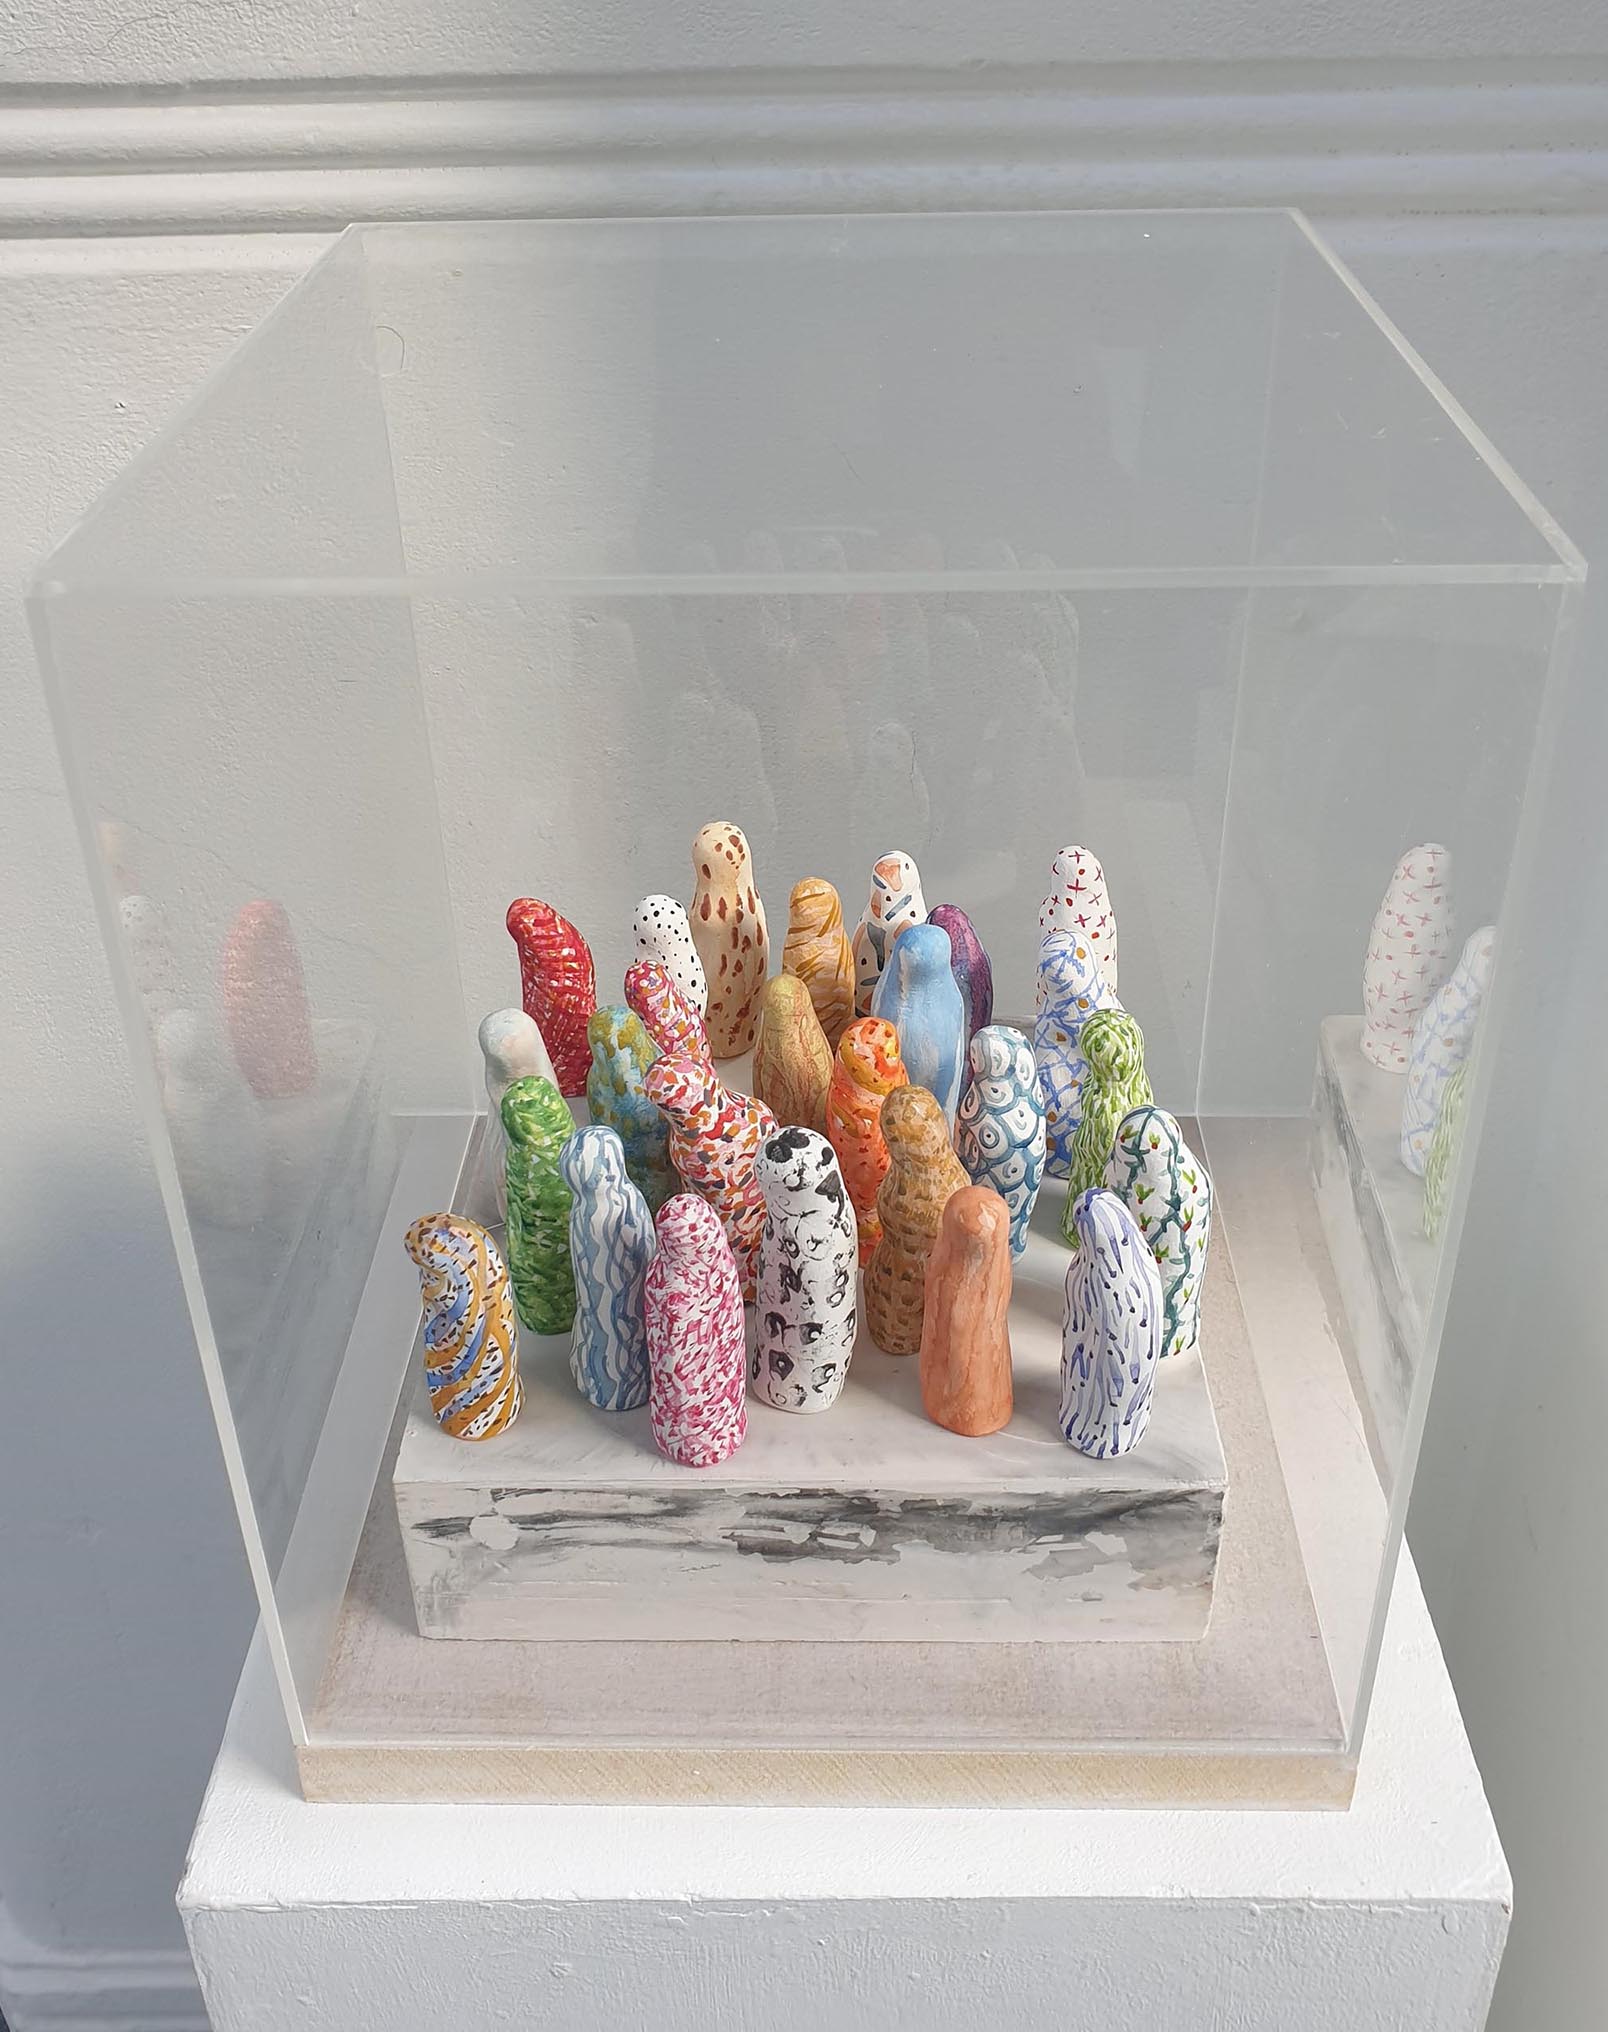 Small brightly decorated clay forms, standing close together on a marbled plaster plinth, enclosed in a transparent acrylic plastic box on a wooden base.